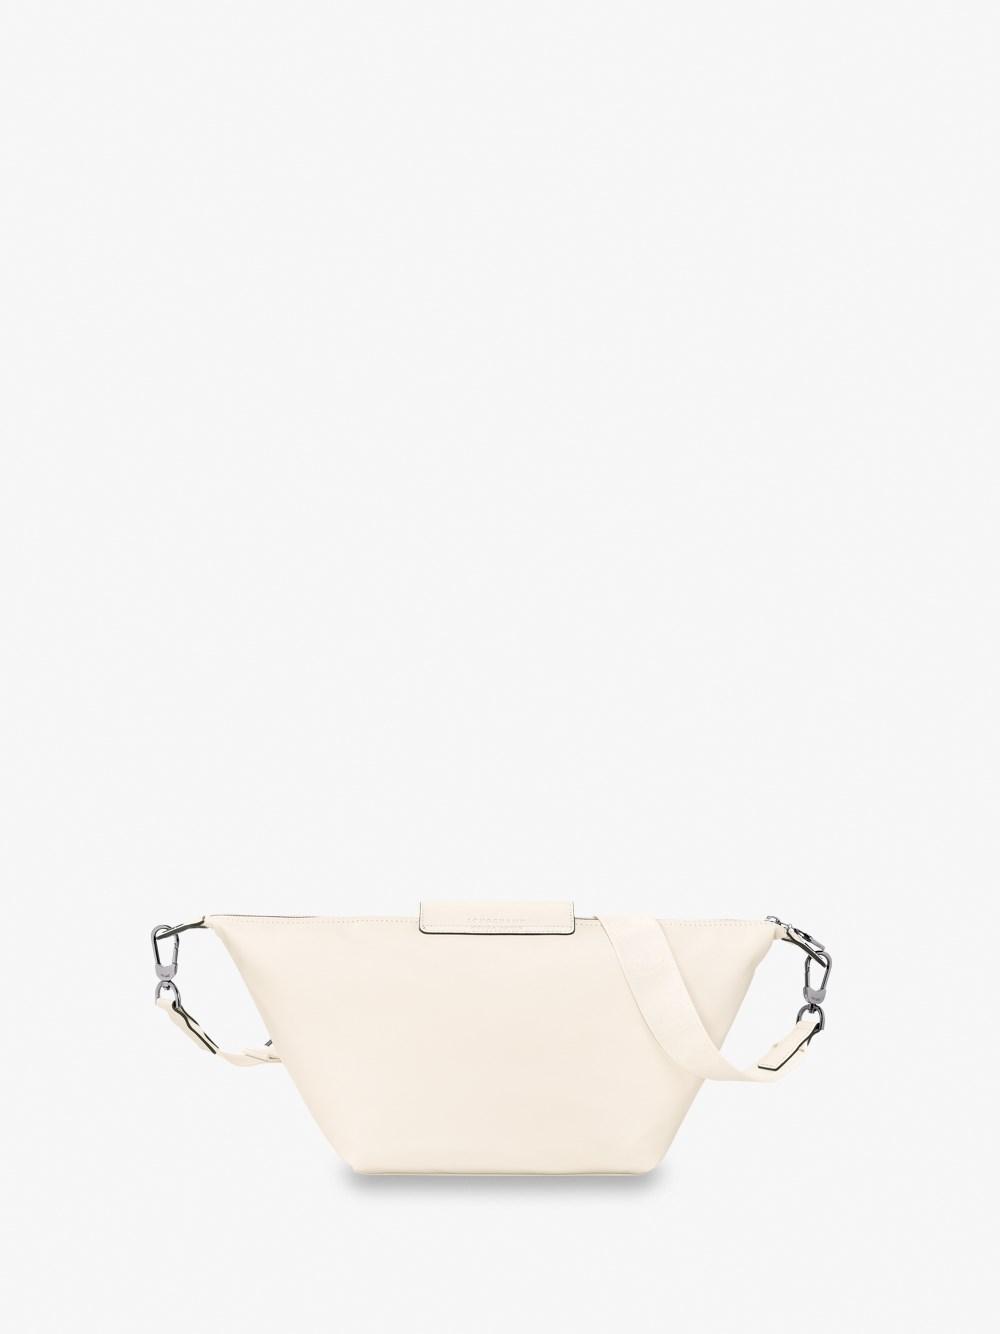 Longchamp `le Pliage Xtra` Small Hobo Bag in Natural